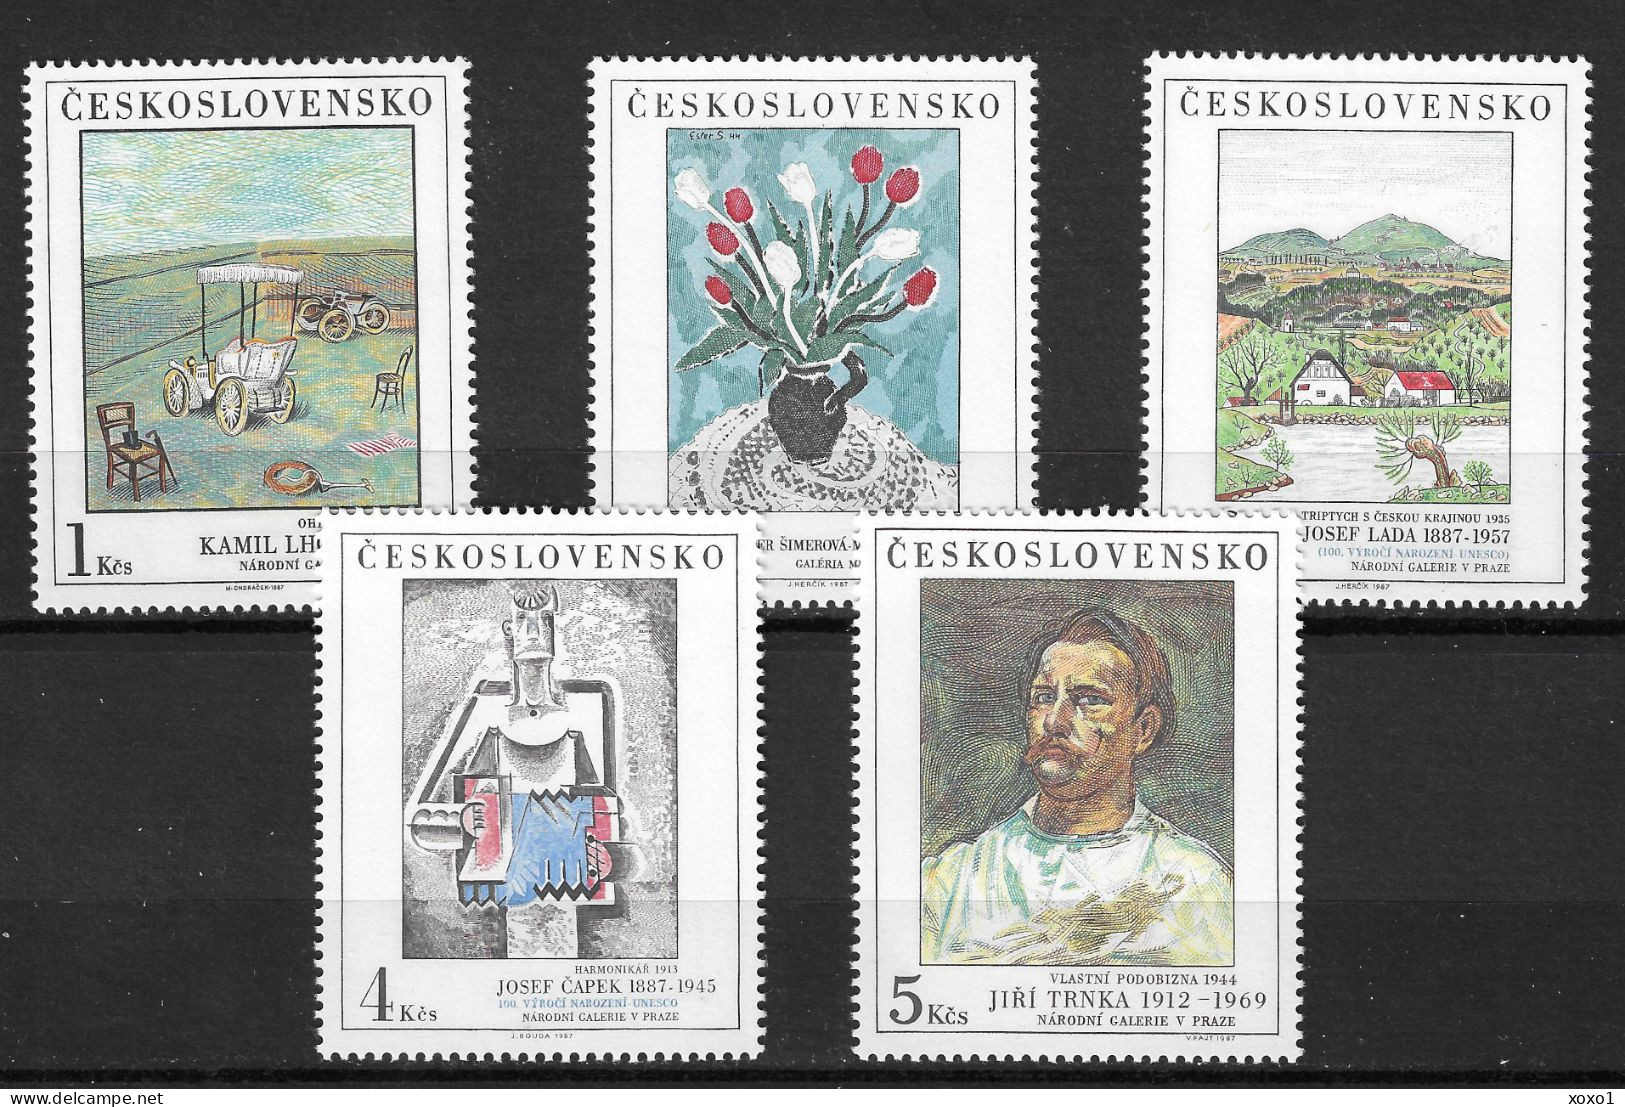 Czechoslovakia 1987 MiNr. 2933 - 2937 National Galleries (XX) Art, Painting, Modern 5v  MNH**  15.00 € - Unused Stamps